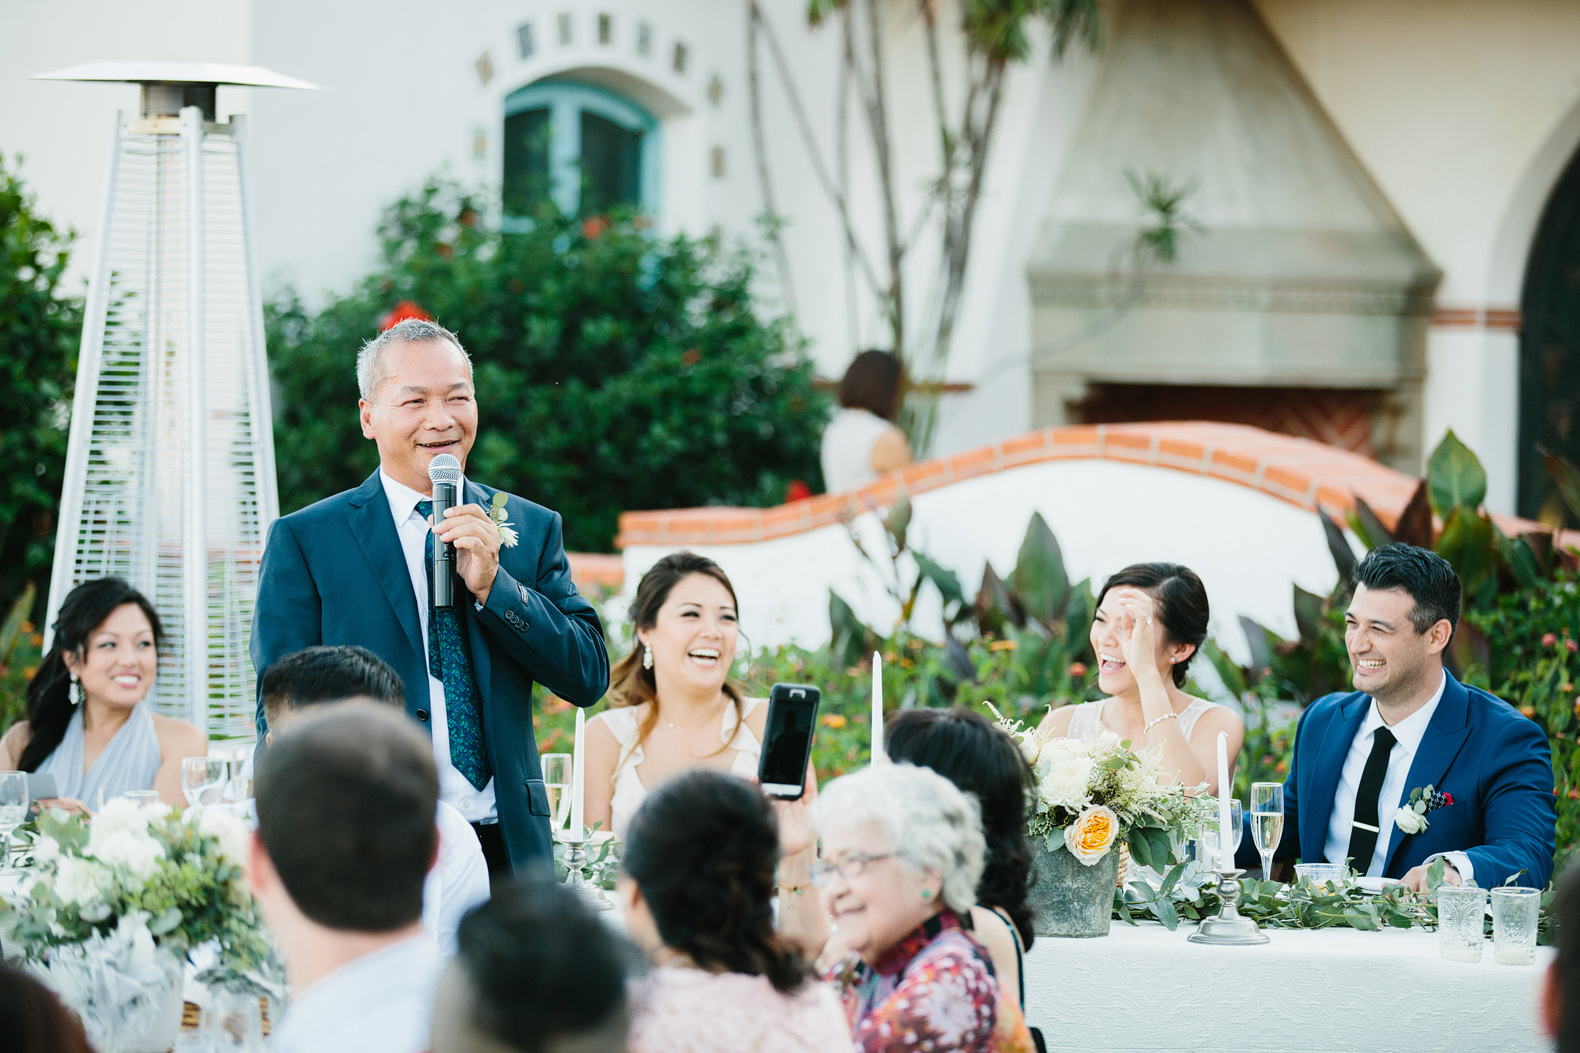 The bride's father welcoming the guests. 